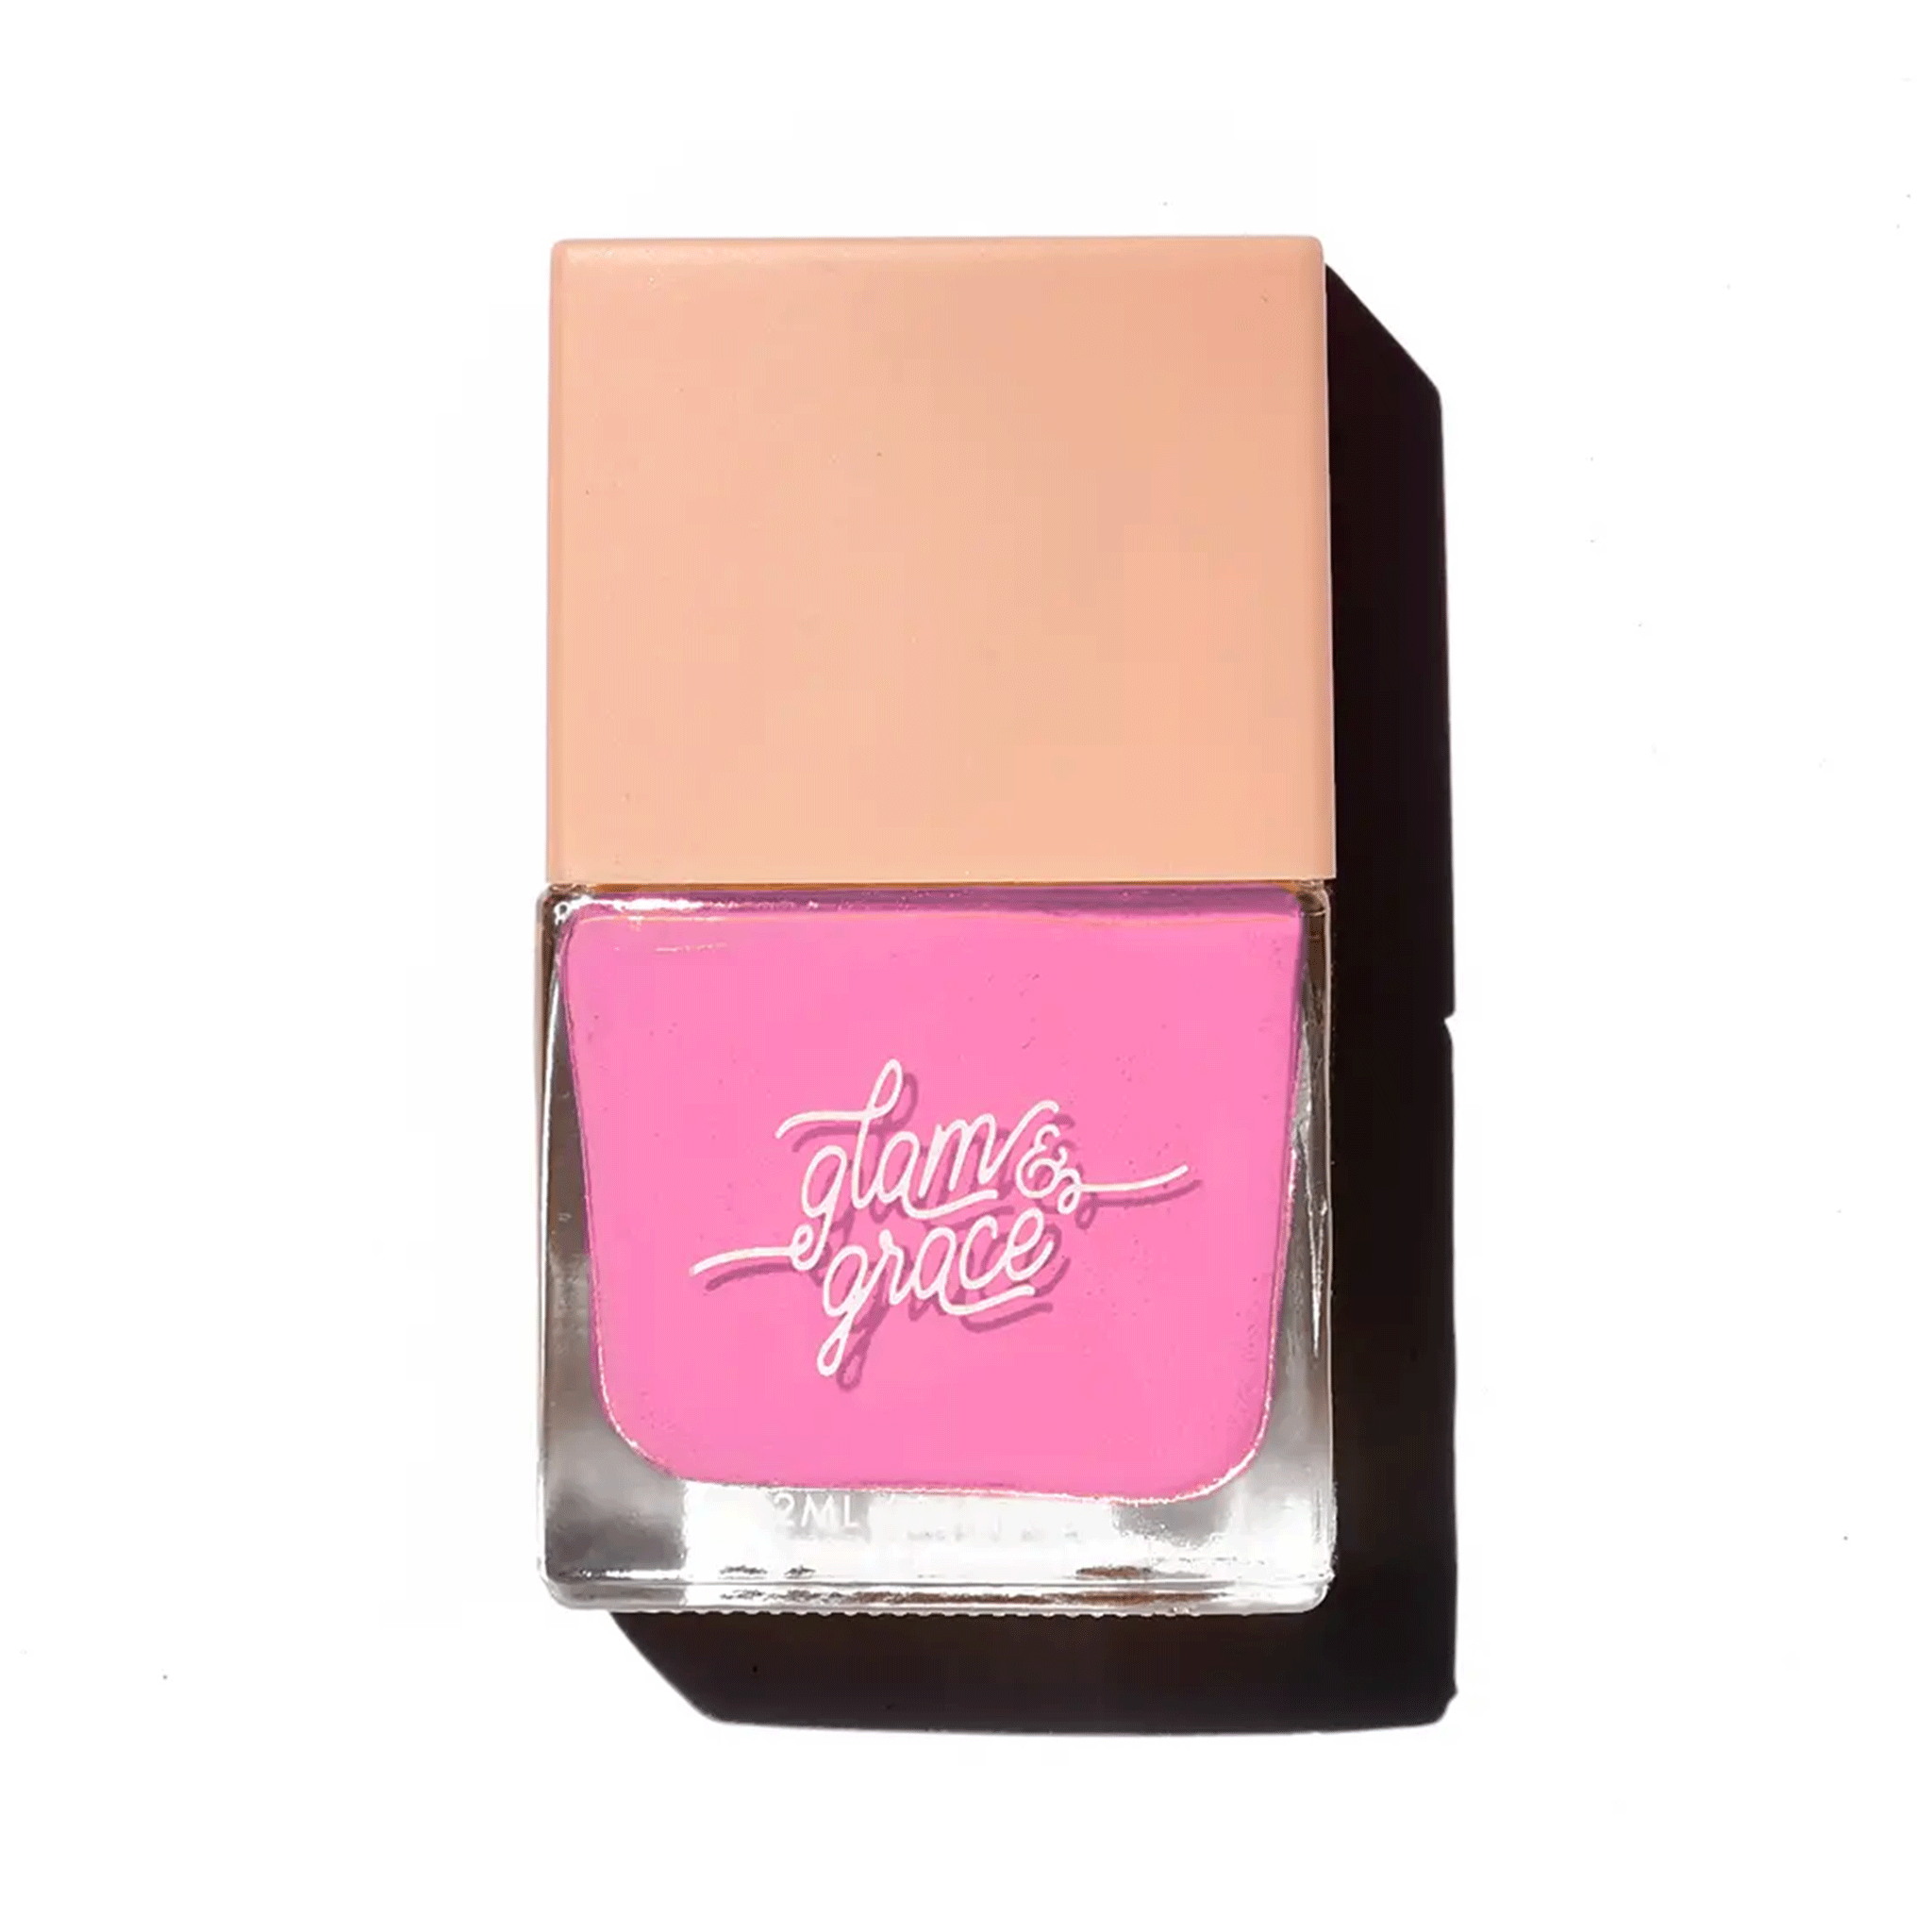 On a white background is a square nail polish bottle with a bright pink nail polish inside. 